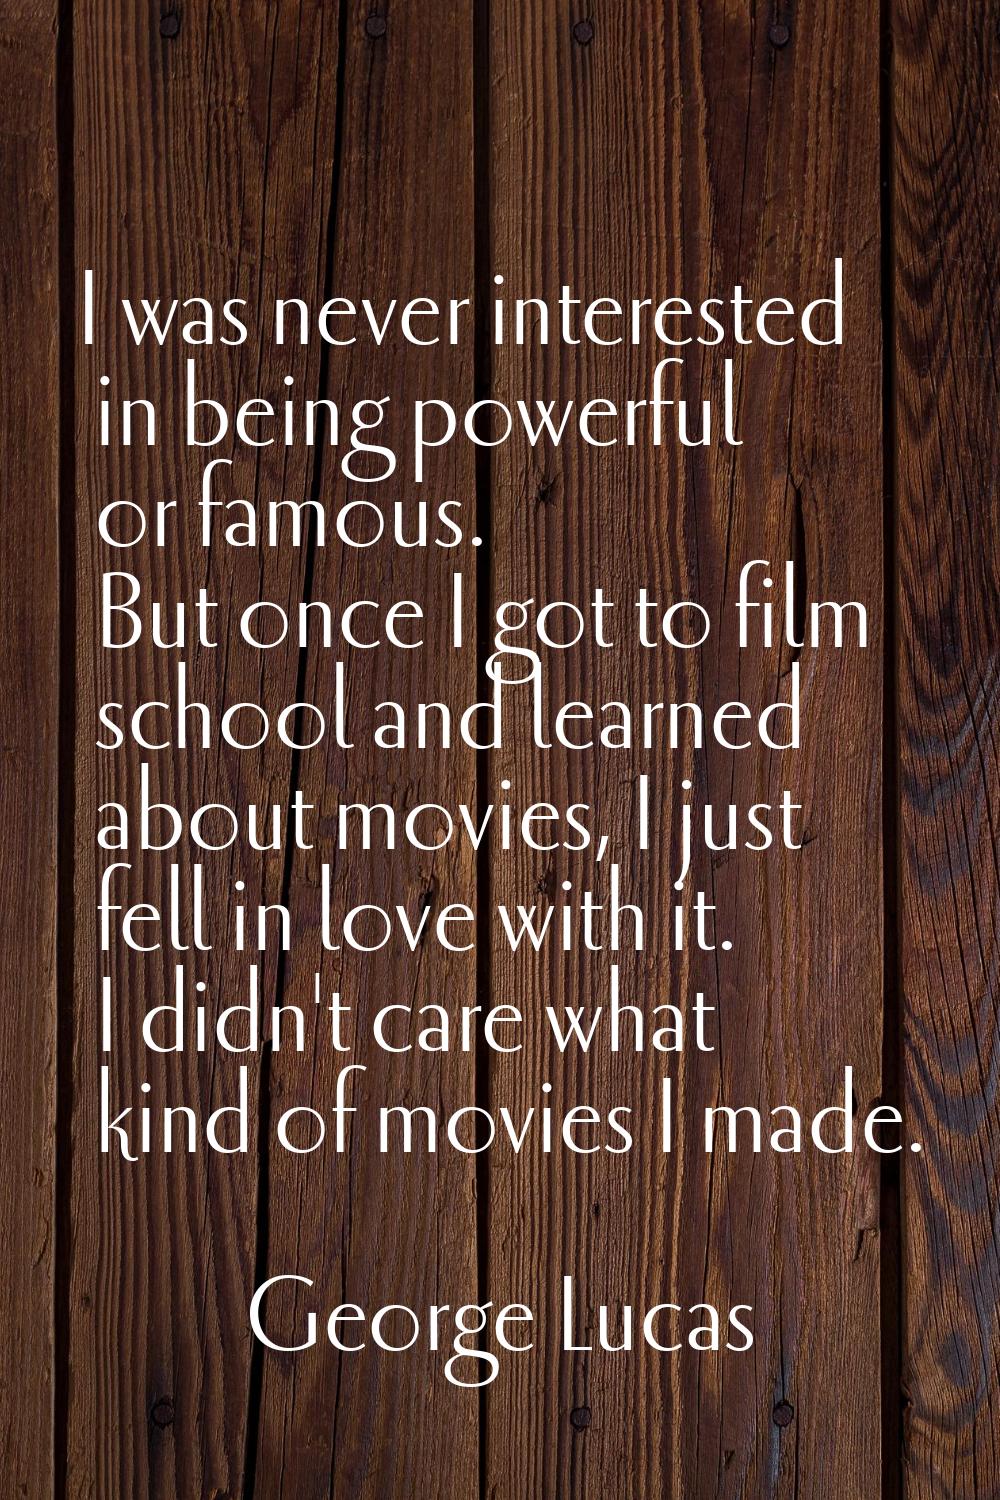 I was never interested in being powerful or famous. But once I got to film school and learned about